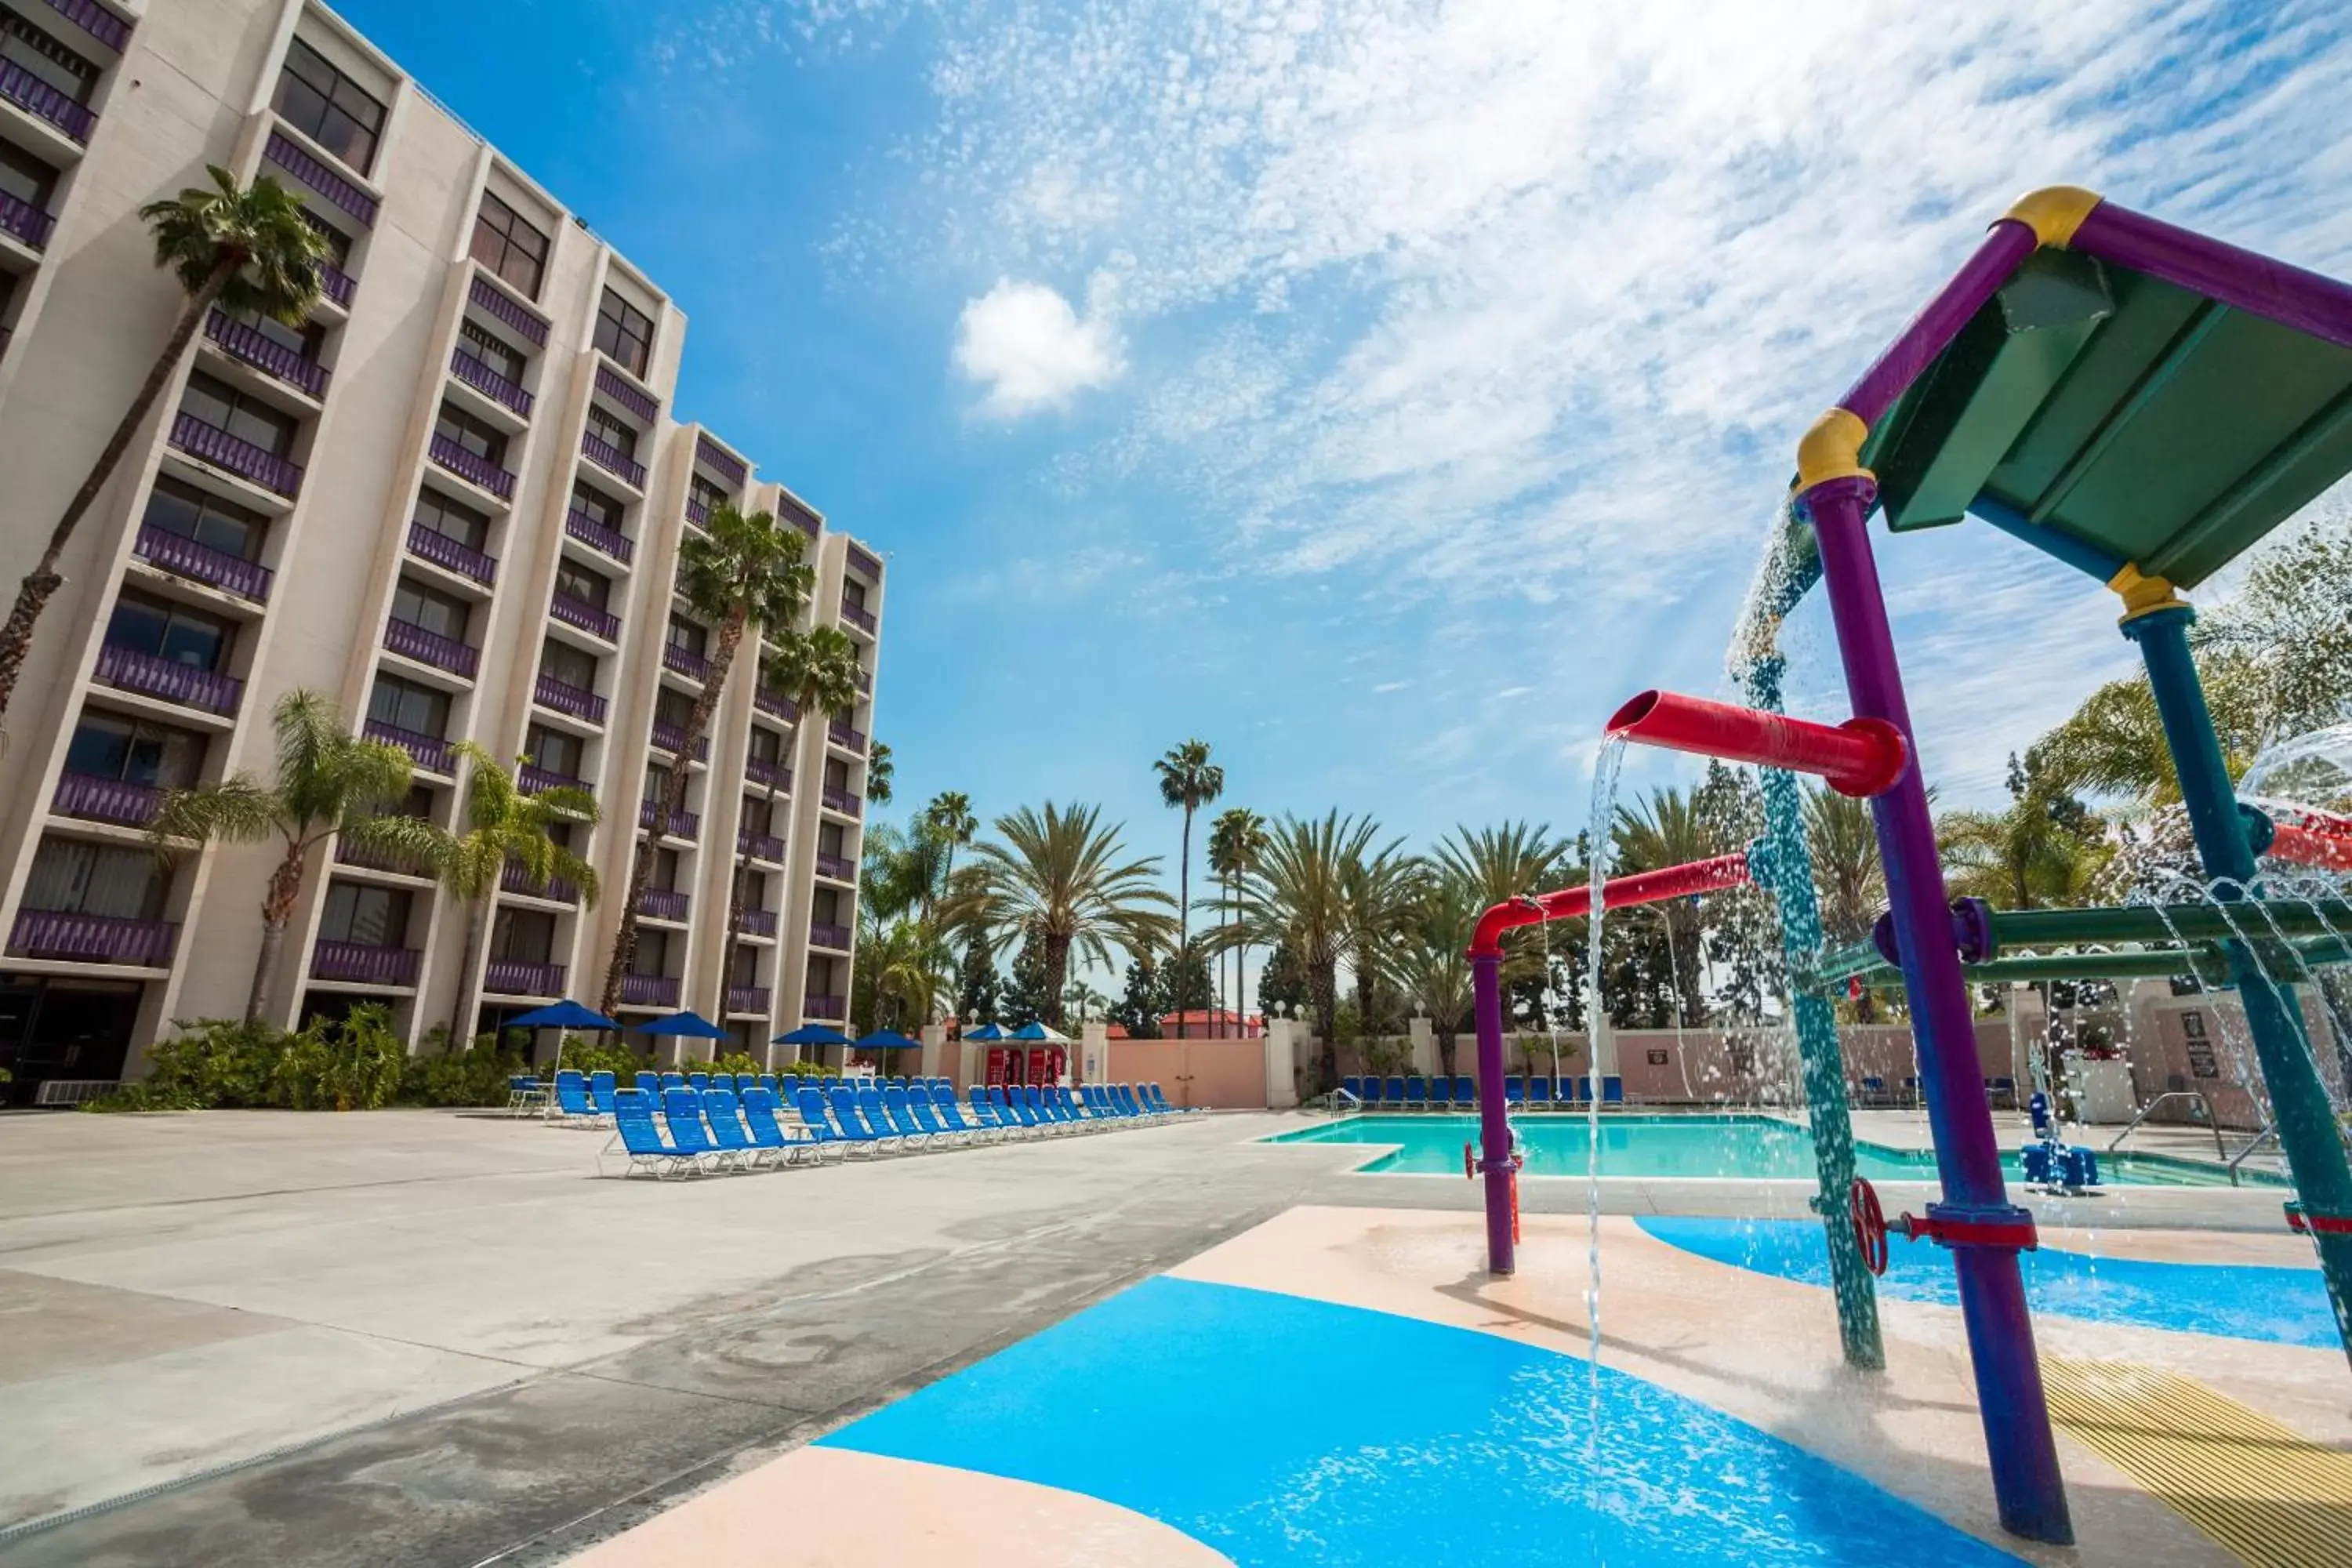 Day, Swimming Pool in Knott's Berry Farm Hotel